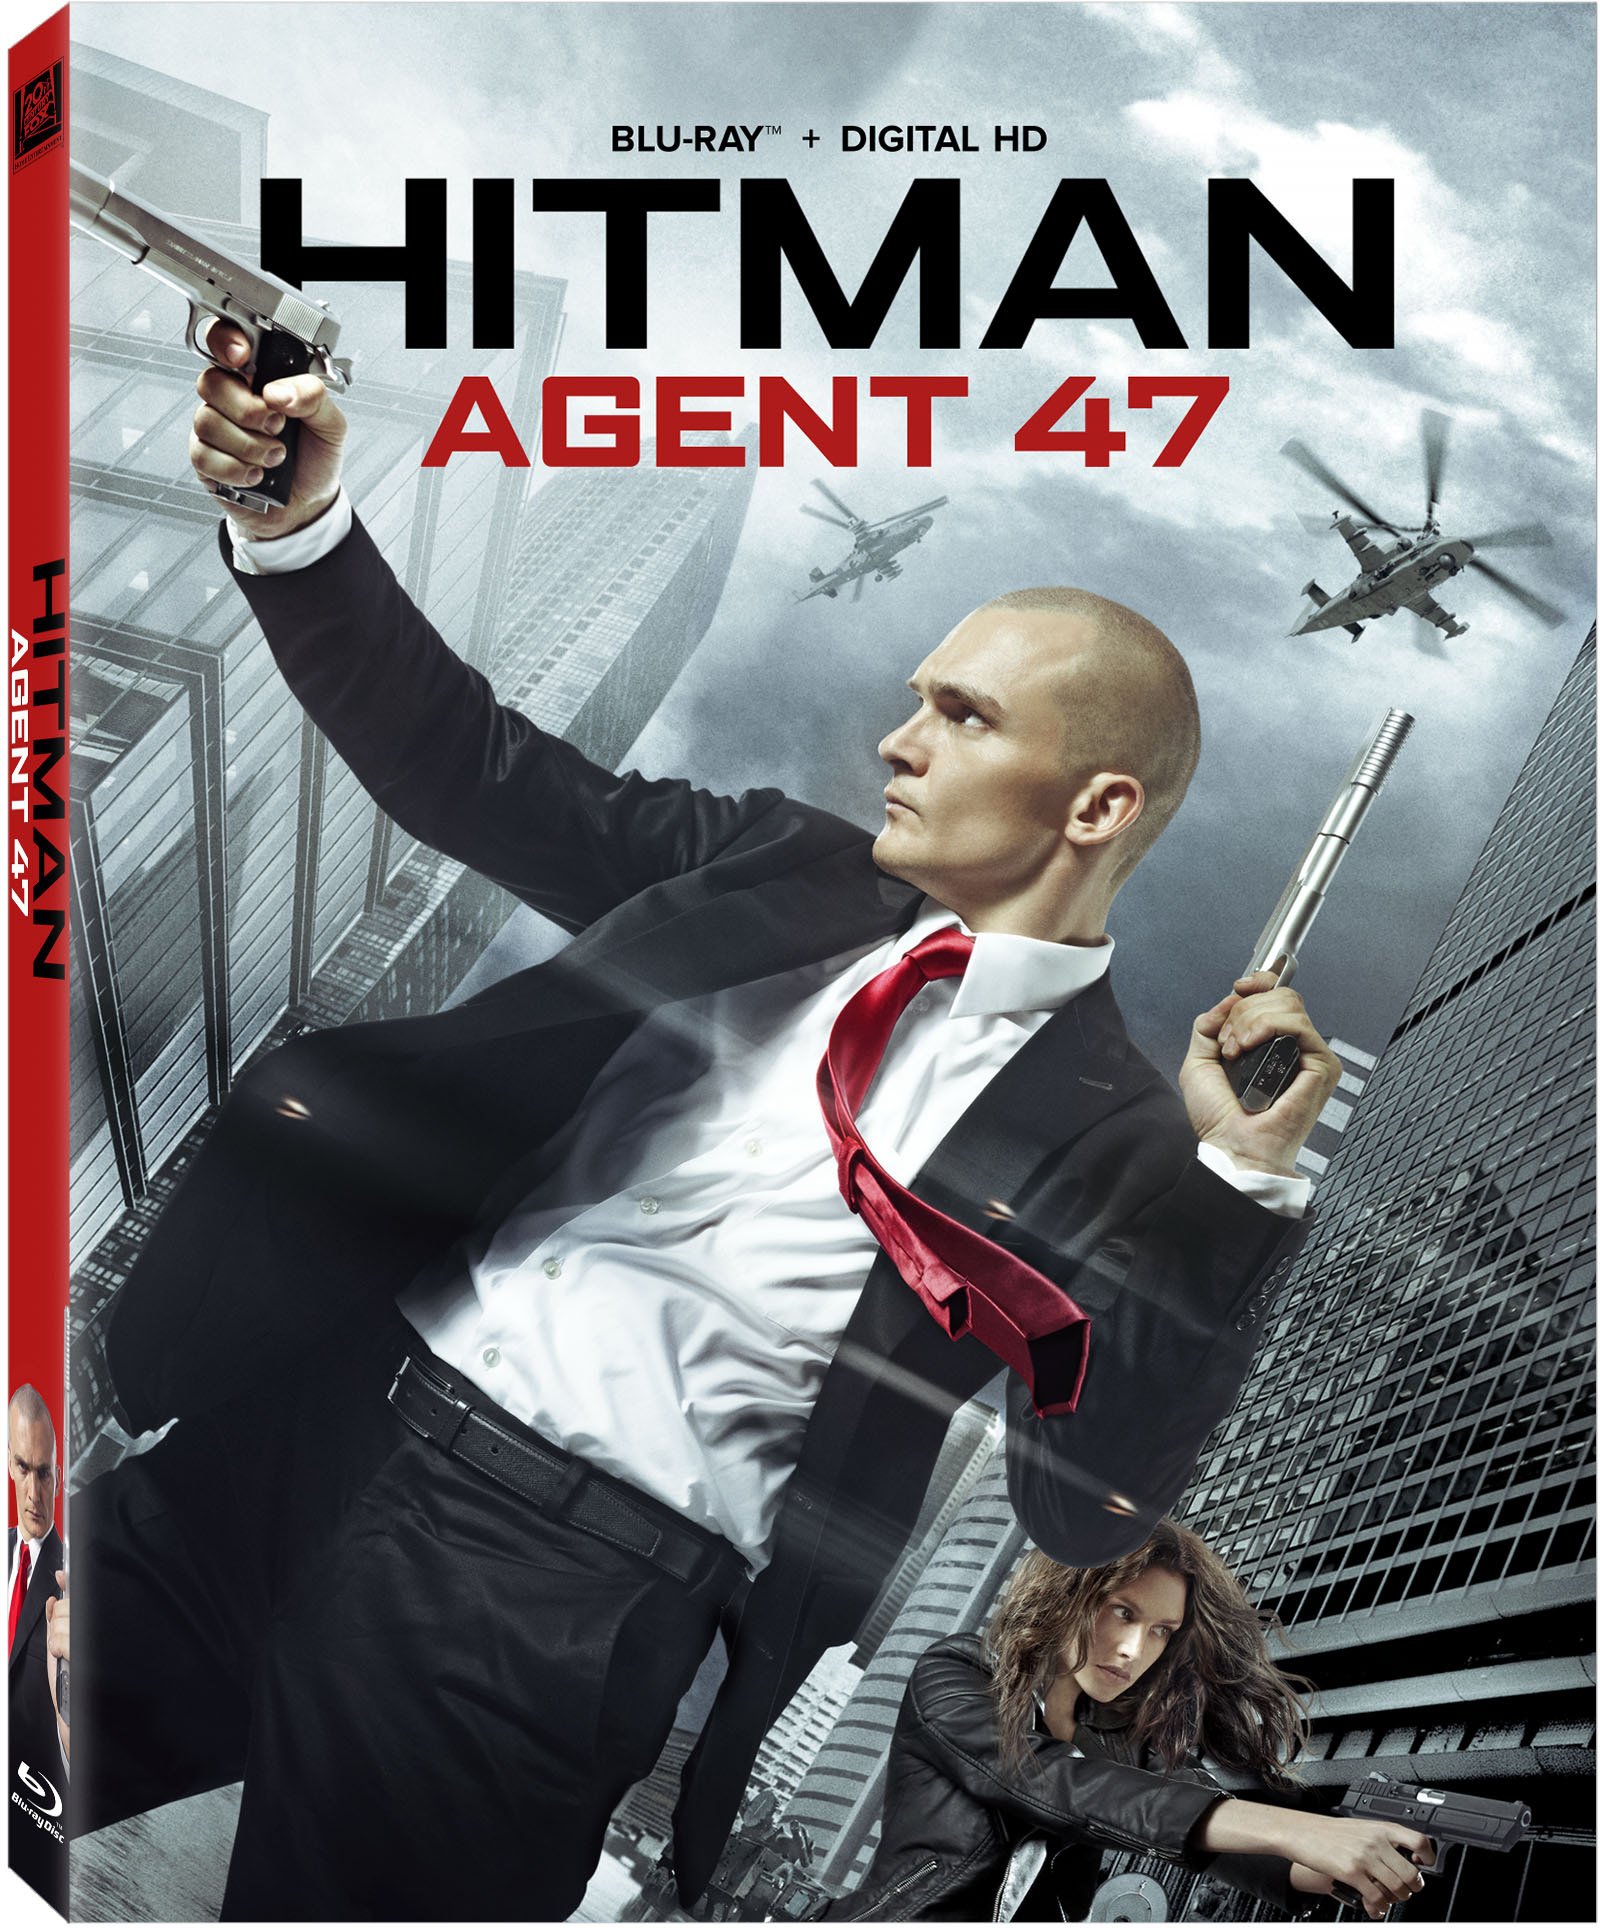 Hitman Agent 47 Wallpapers Movie Hq Hitman Agent 47 Pictures 4k Wallpapers 19